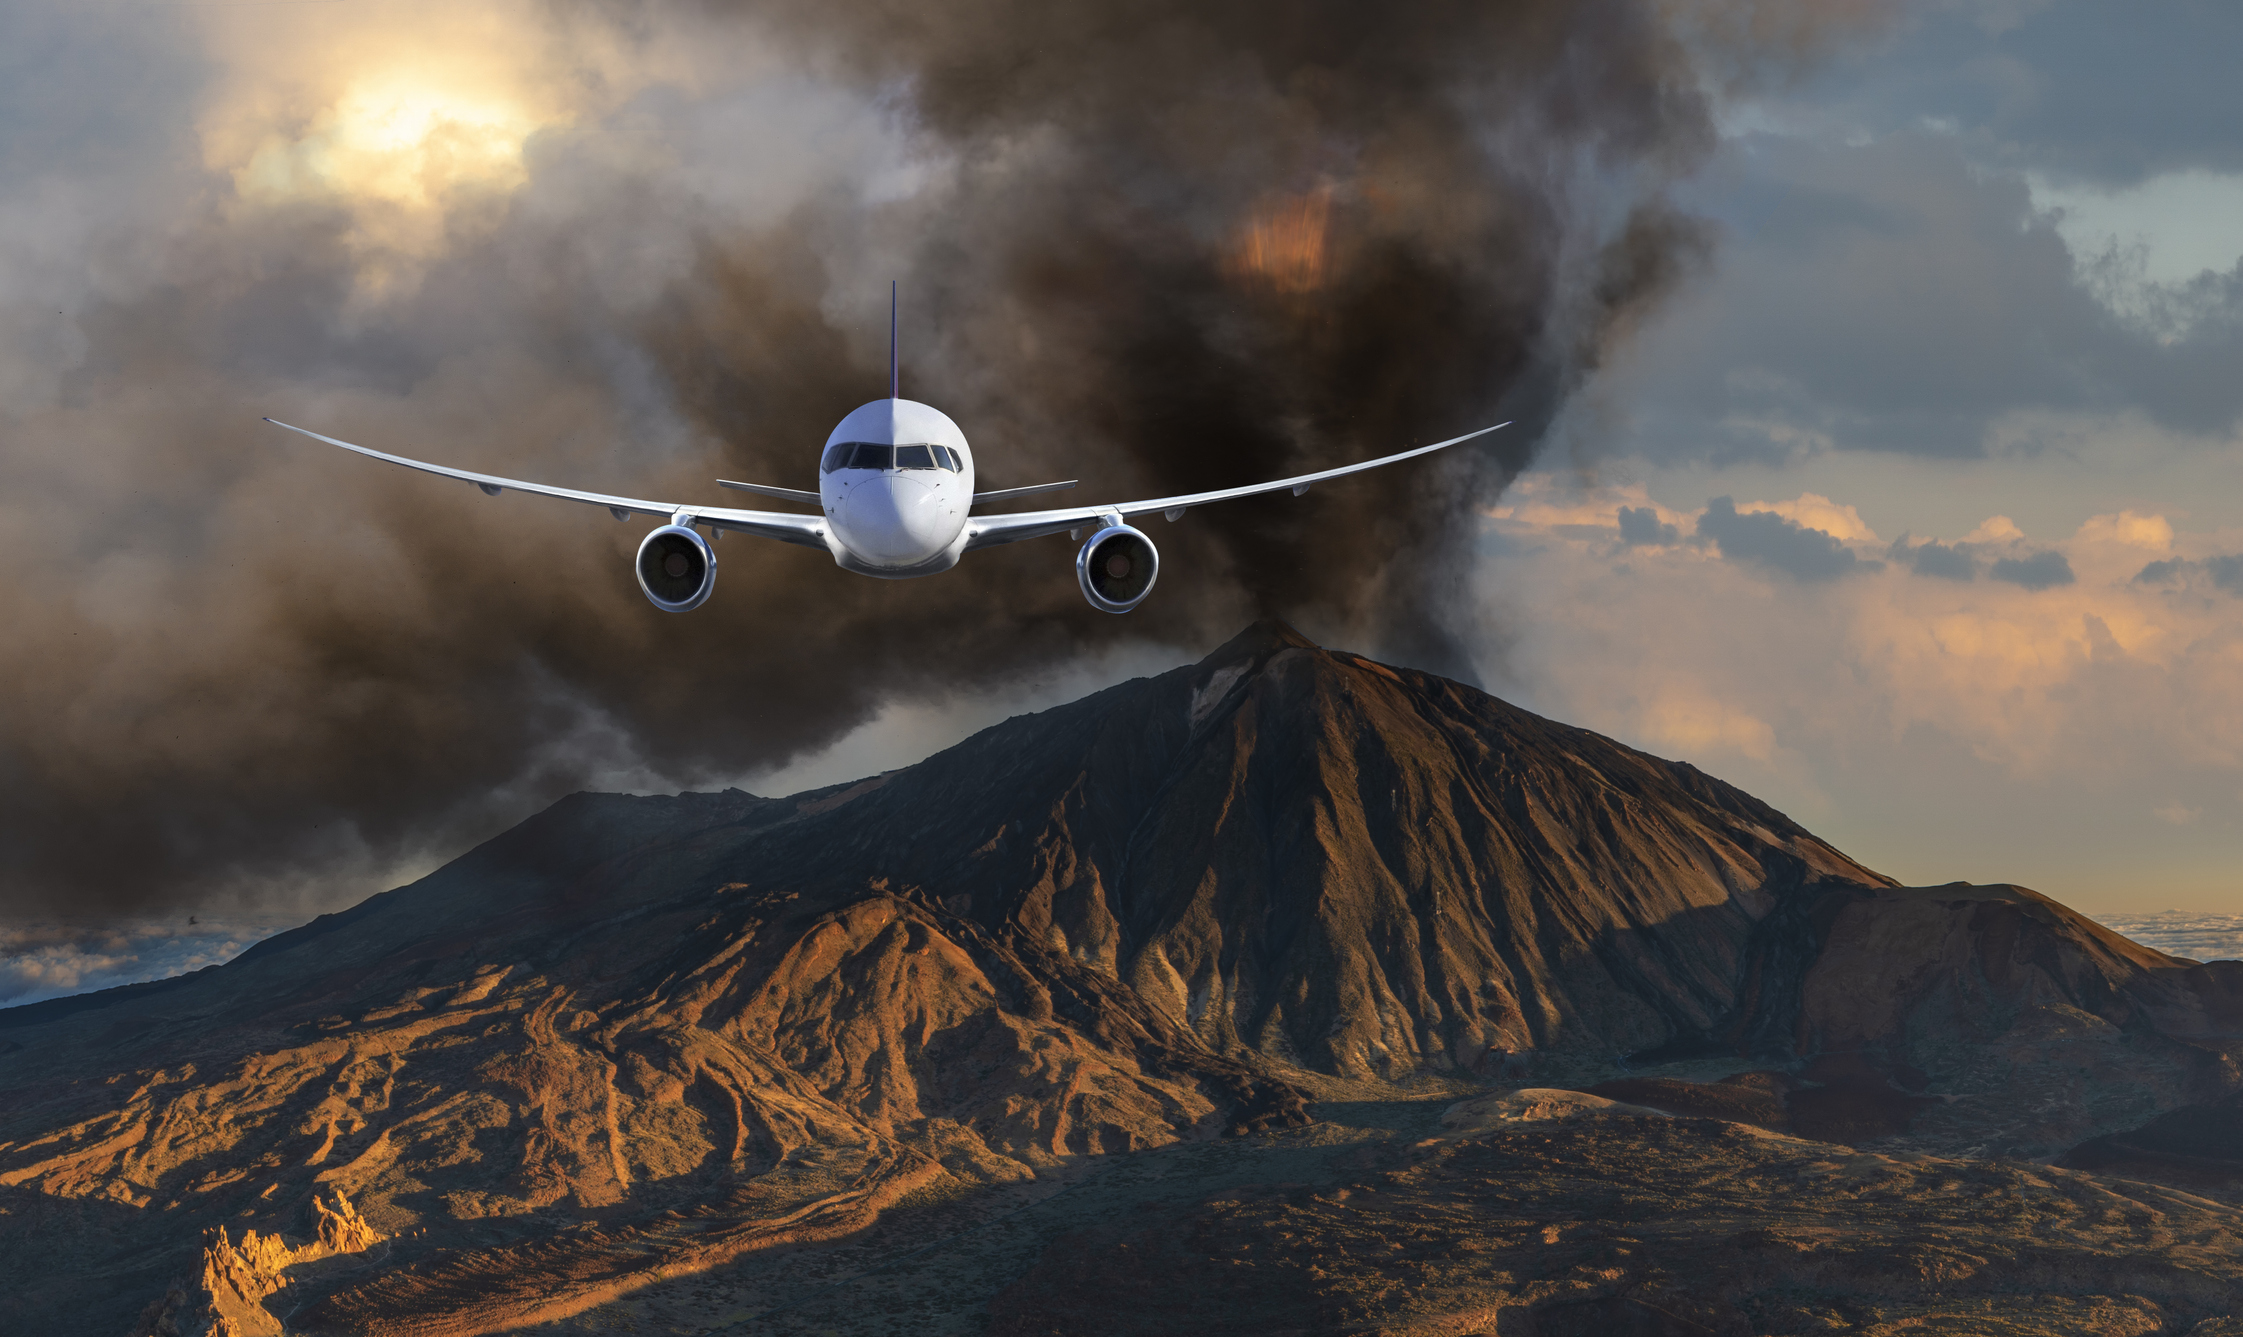 An airplane flies towards the camera, an ash cloud and volcanic landscape can be seen in the background.